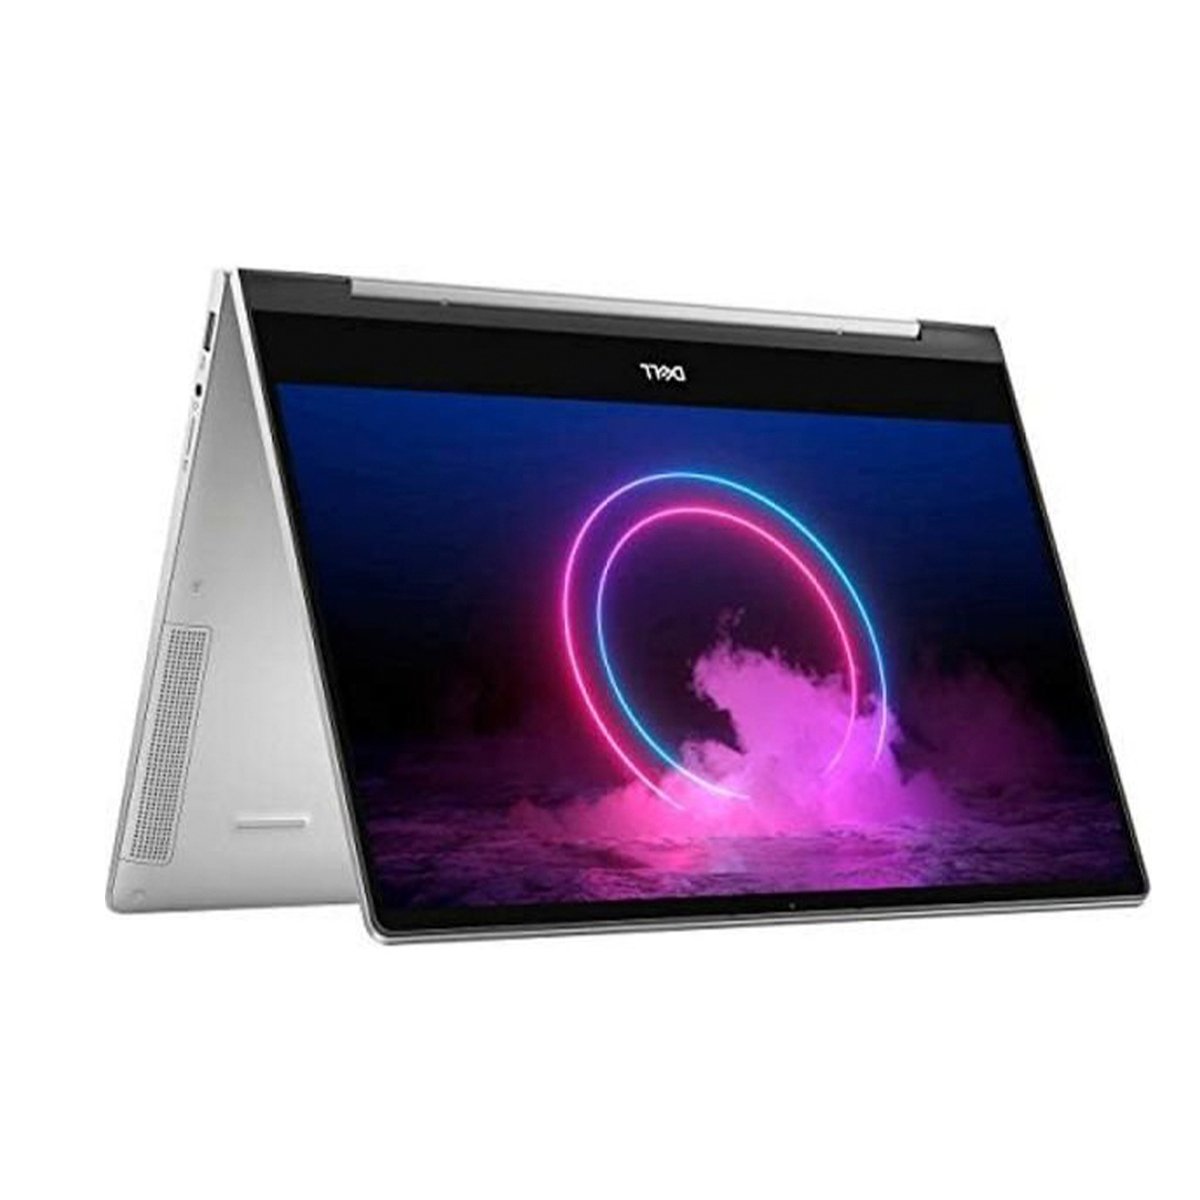 Dell Inspiron 13 (7391-INS-0022-SLR)2in1 Laptop,Intel® Core™ i7-10510U ,16GB RAM,1TB SSD,Intel® UHD Graphics with shared graphics memory,13.3" FHD Touch Screen,Silver